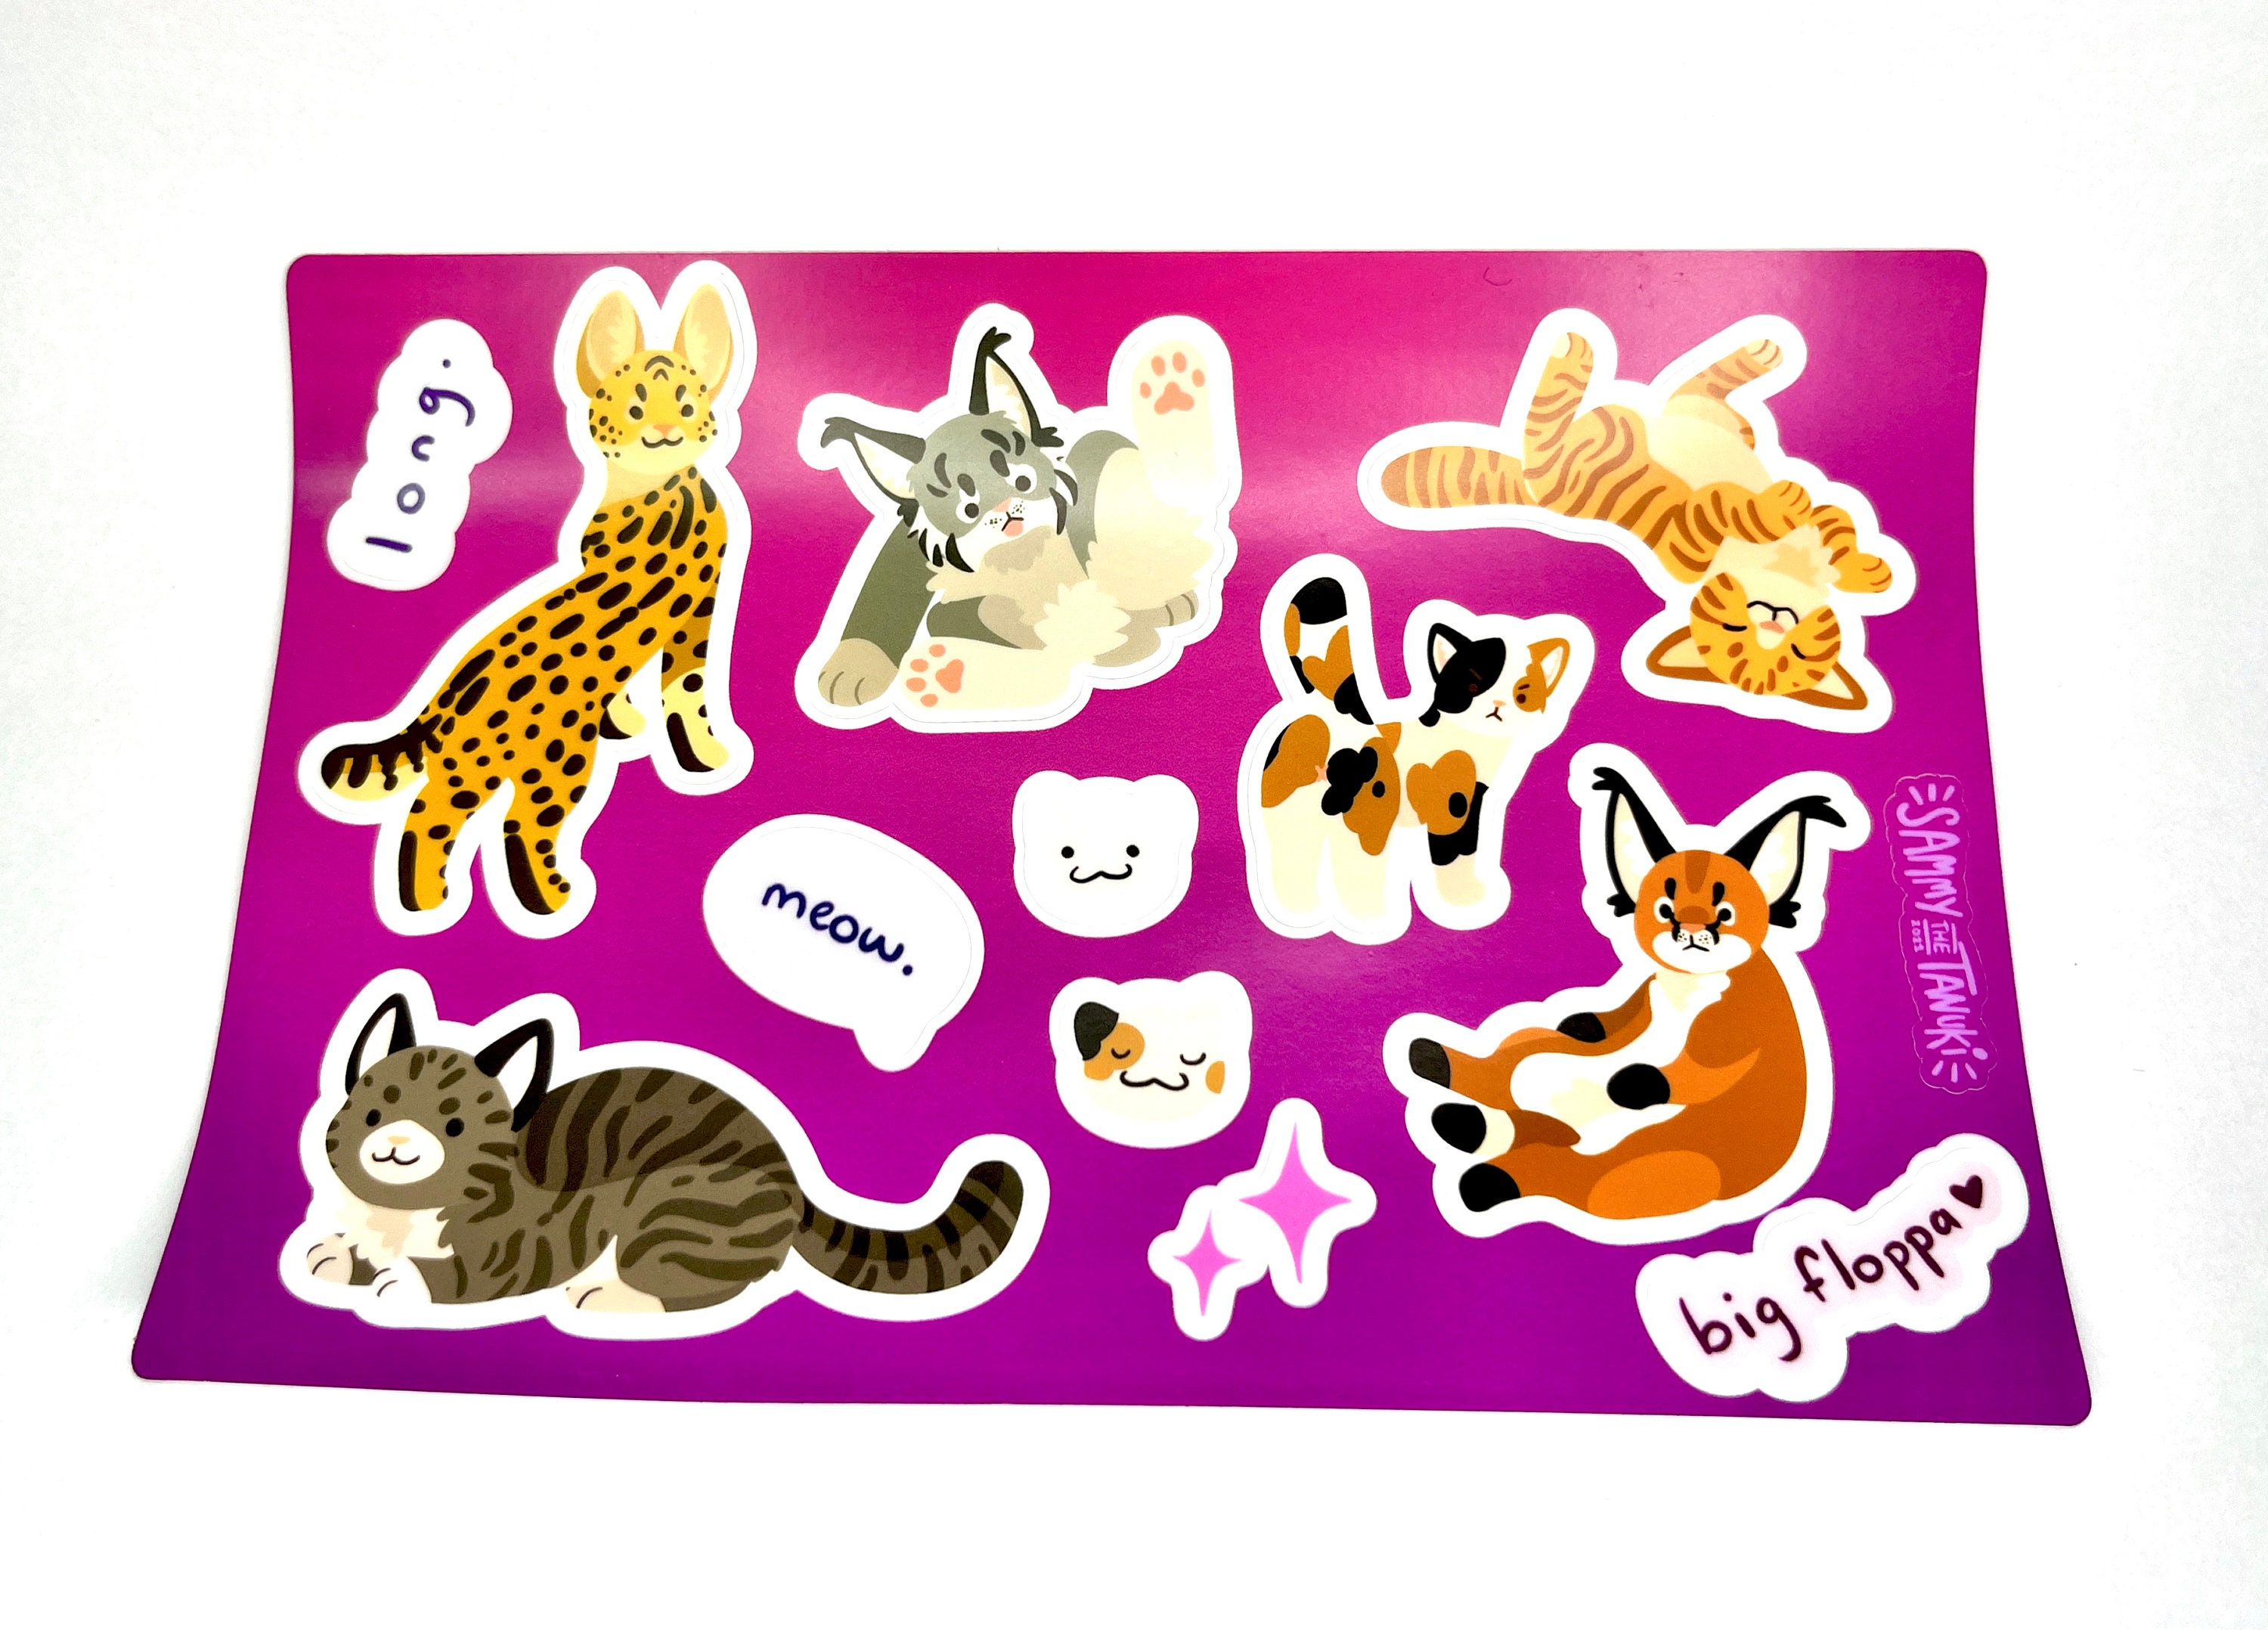 CHAD FLOPPA CAT \ CARACALS \  Sticker for Sale by Mad-Boy